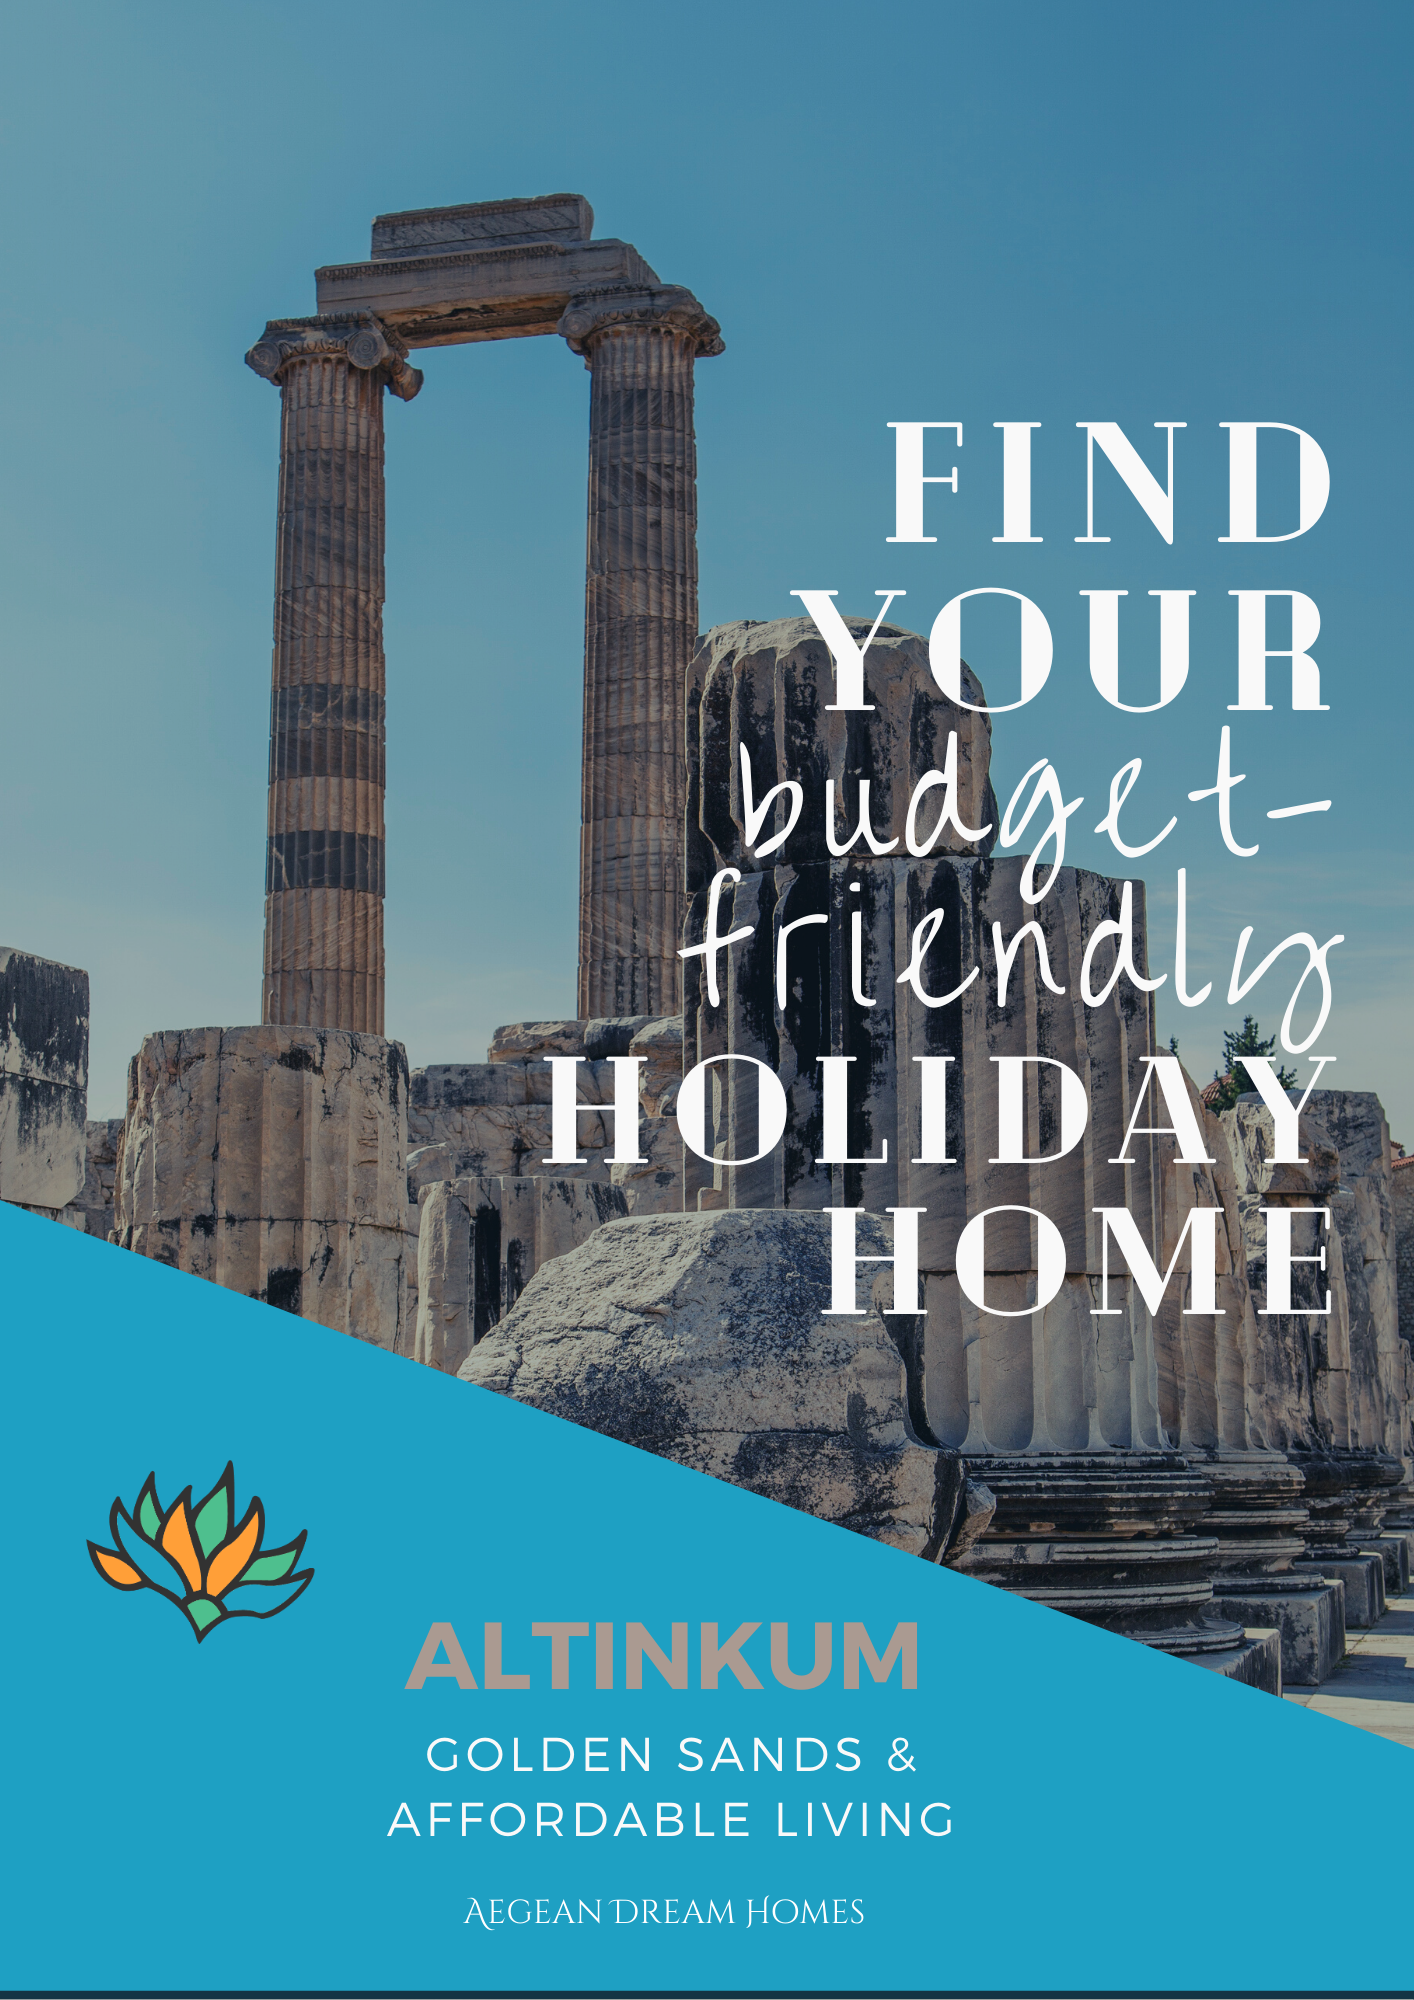 Altinkum property for sale banner. Picture of Apollon temple. Text overlay reads: Find your budget friendly holiday home. Altinkum. Golden sands and affordable living. Aegean Dream Homes.com